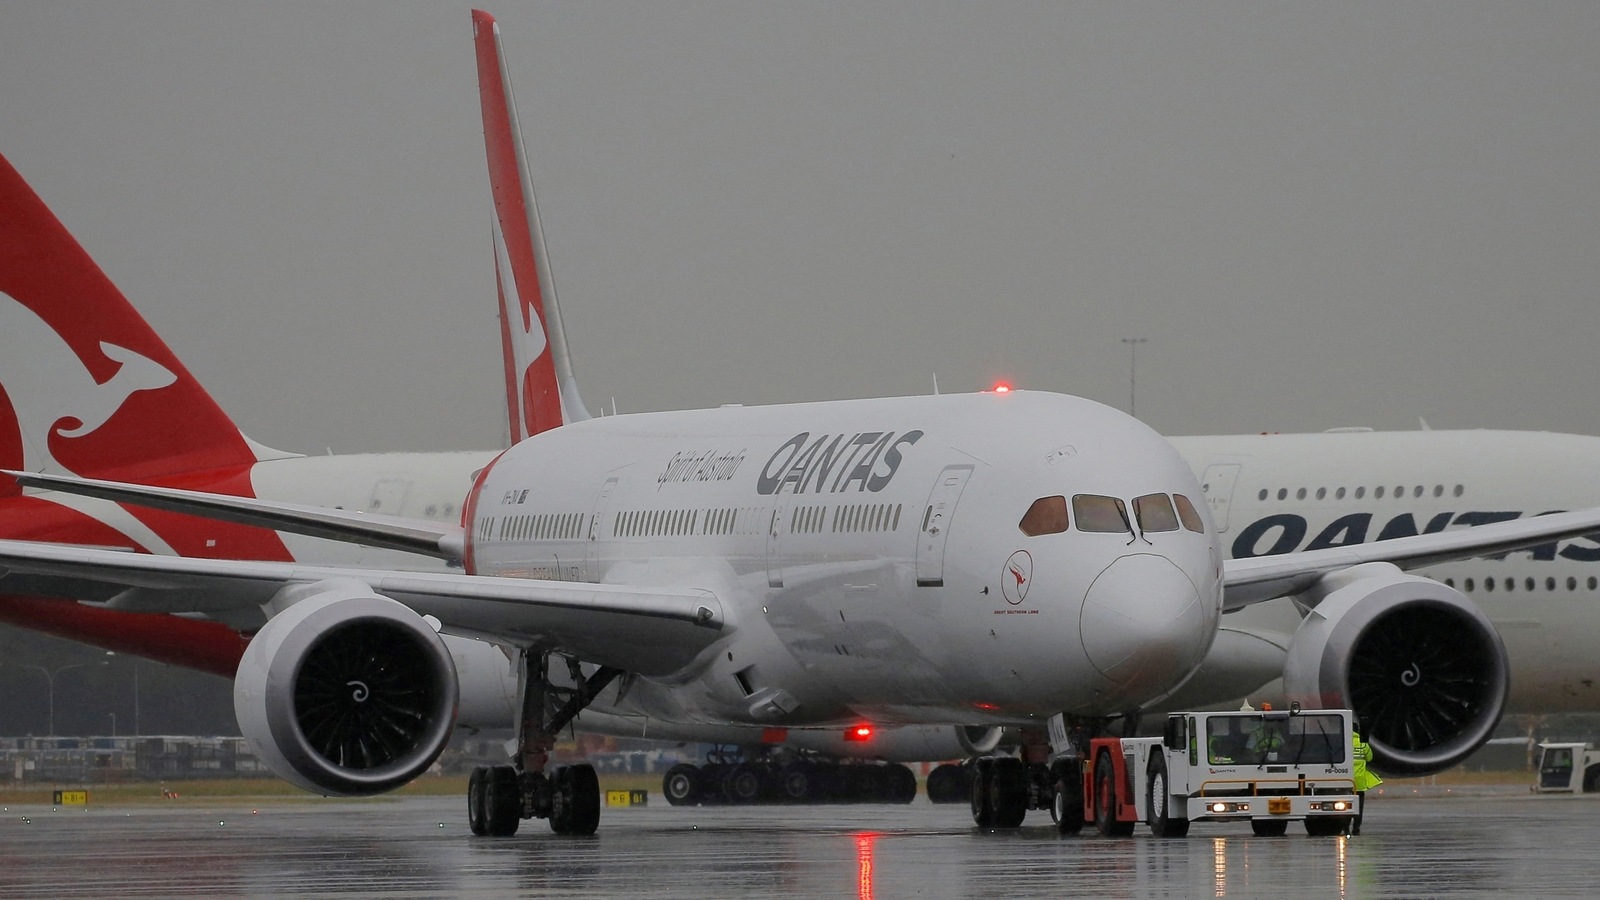 Qantas flight to Fiji from Sydney suffers midair mechanical issue, 2nd in 2 days